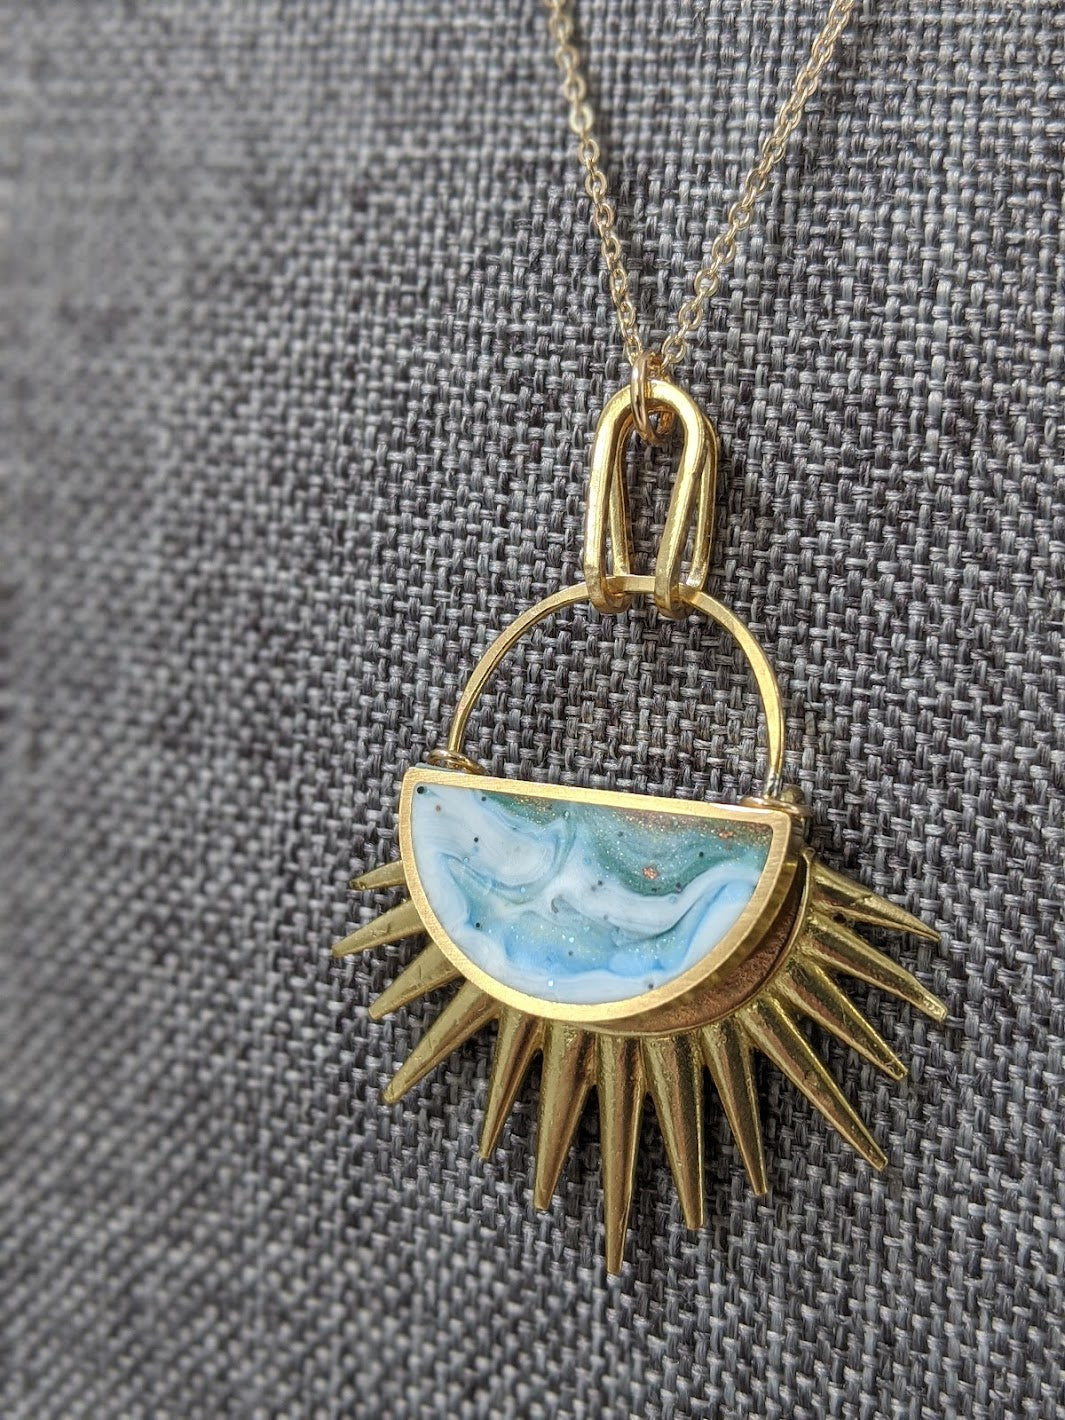 Full of Hope -  Half Moon Brass and Eco-resin Necklace